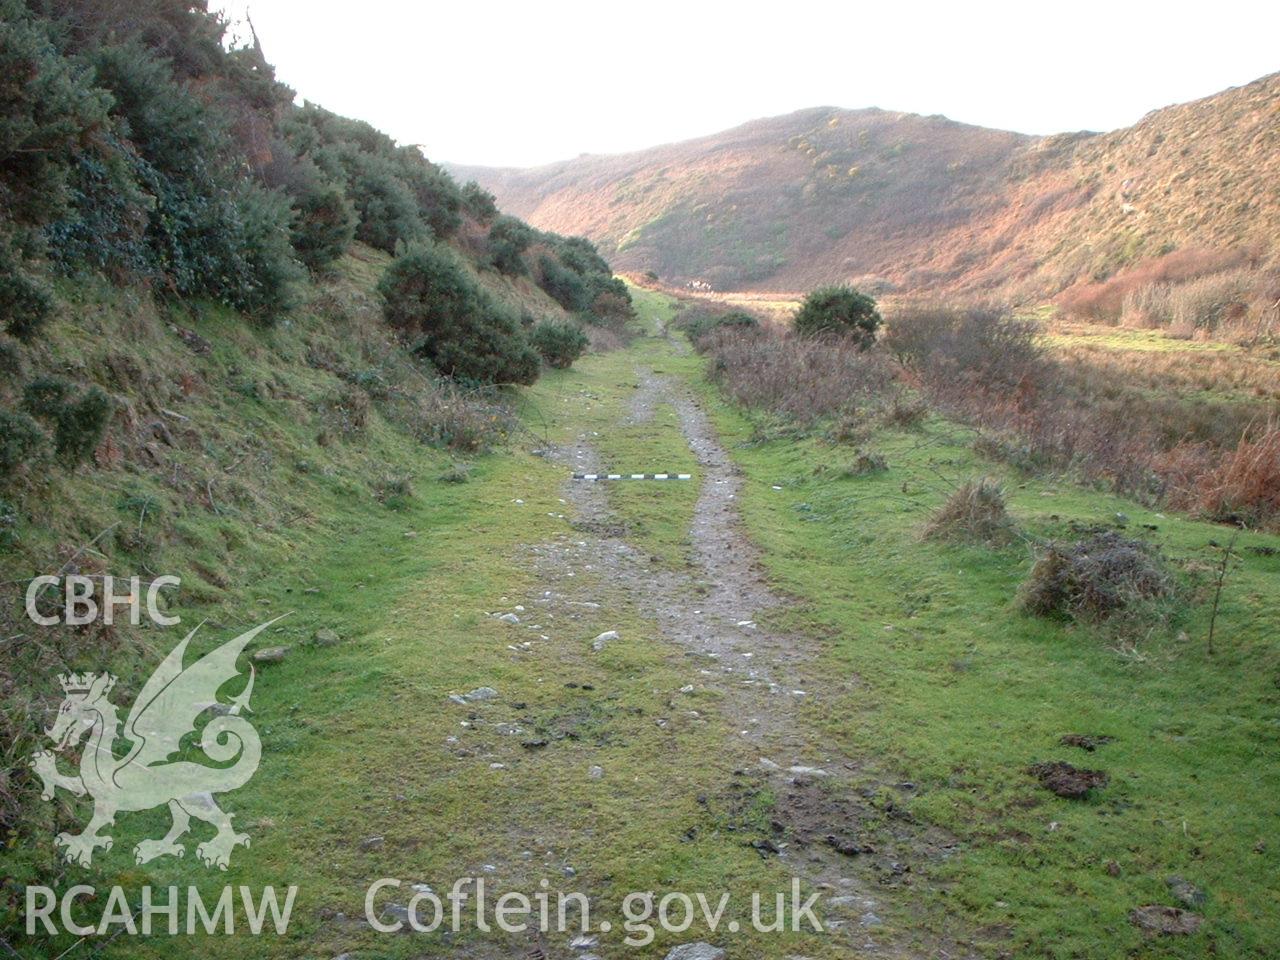 Digital colour photograph showing a Track at Gwadn, NTSMR number 81933. Taken from a National Trust archaeological survey report on St Elvis, Pointz Castle, Solva to Cwmbach, South Wales, produced by Salvatore Garfi, 2004.